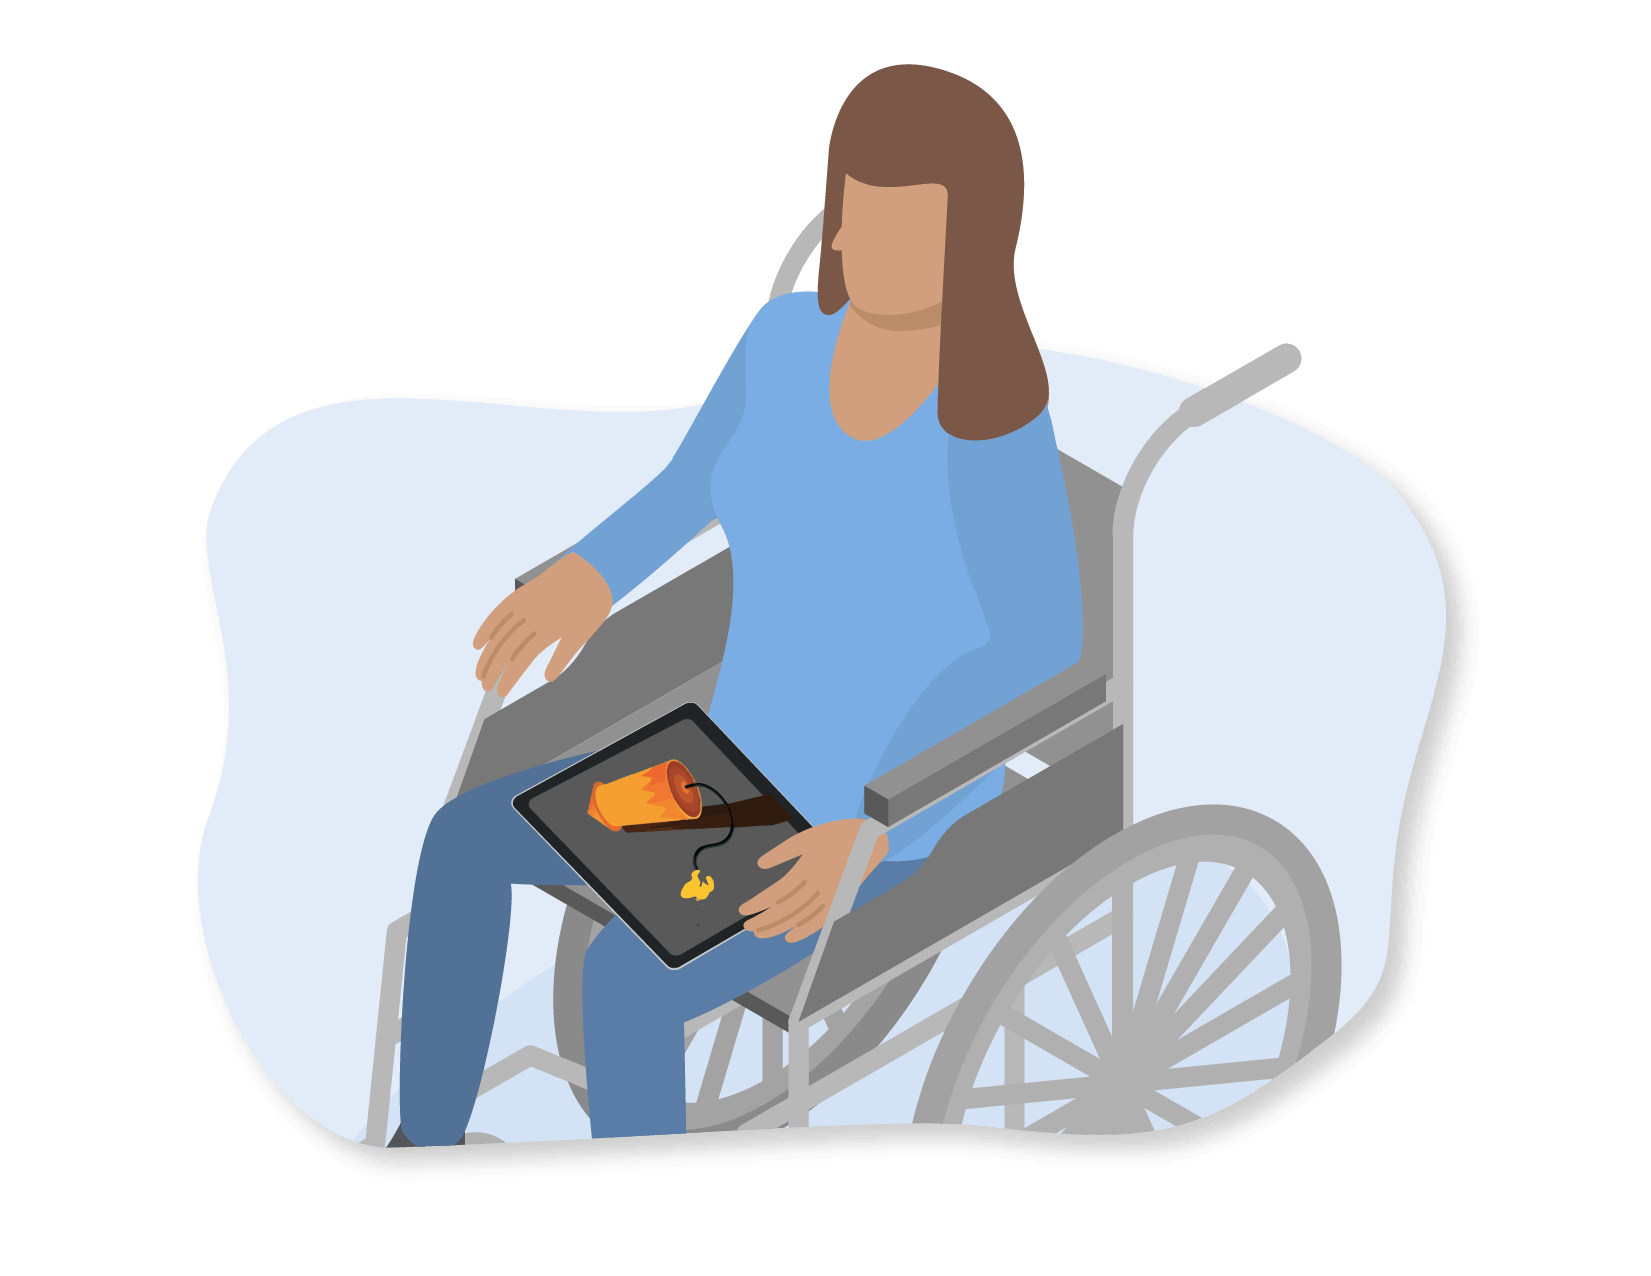 Illustration of a young person in a wheelchair with a tablet